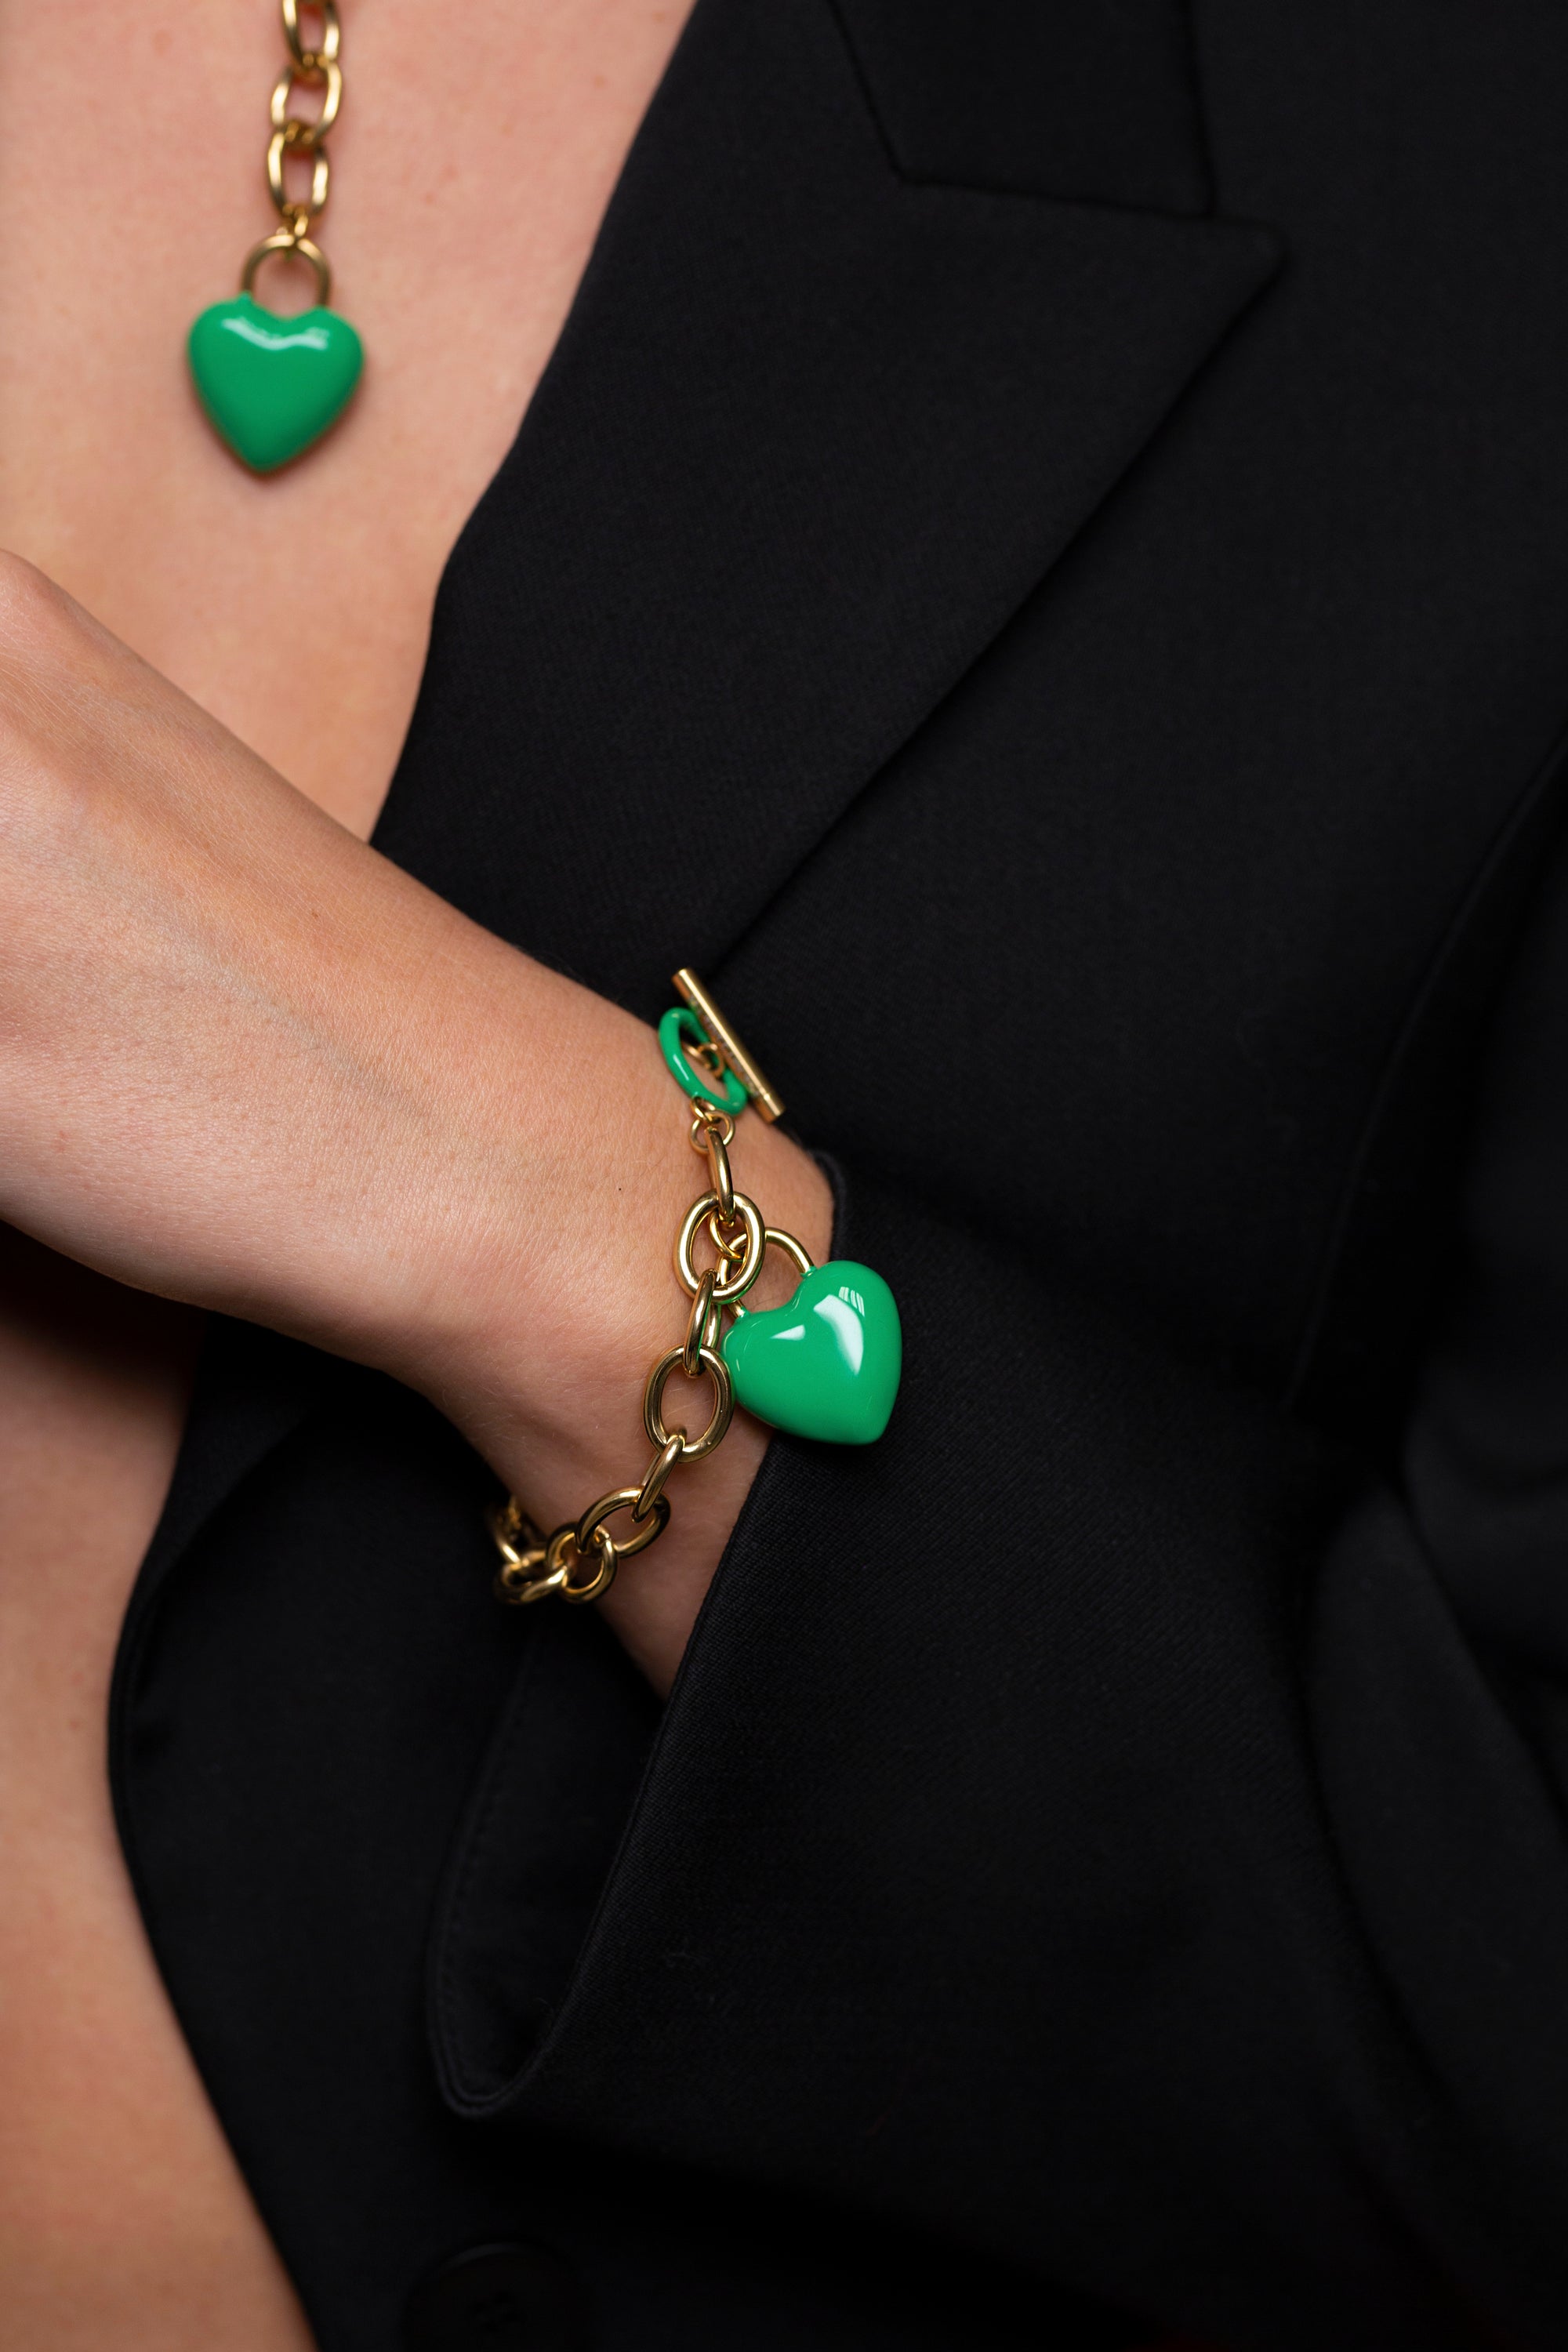 A person wearing a black blazer showcases The Kiss Bracelet by For Art's Sake®, an 18k gold chain bracelet adorned with an enamel-covered heart charm. A matching necklace with a green heart pendant is partially visible. The person's hand is tucked into the blazer.